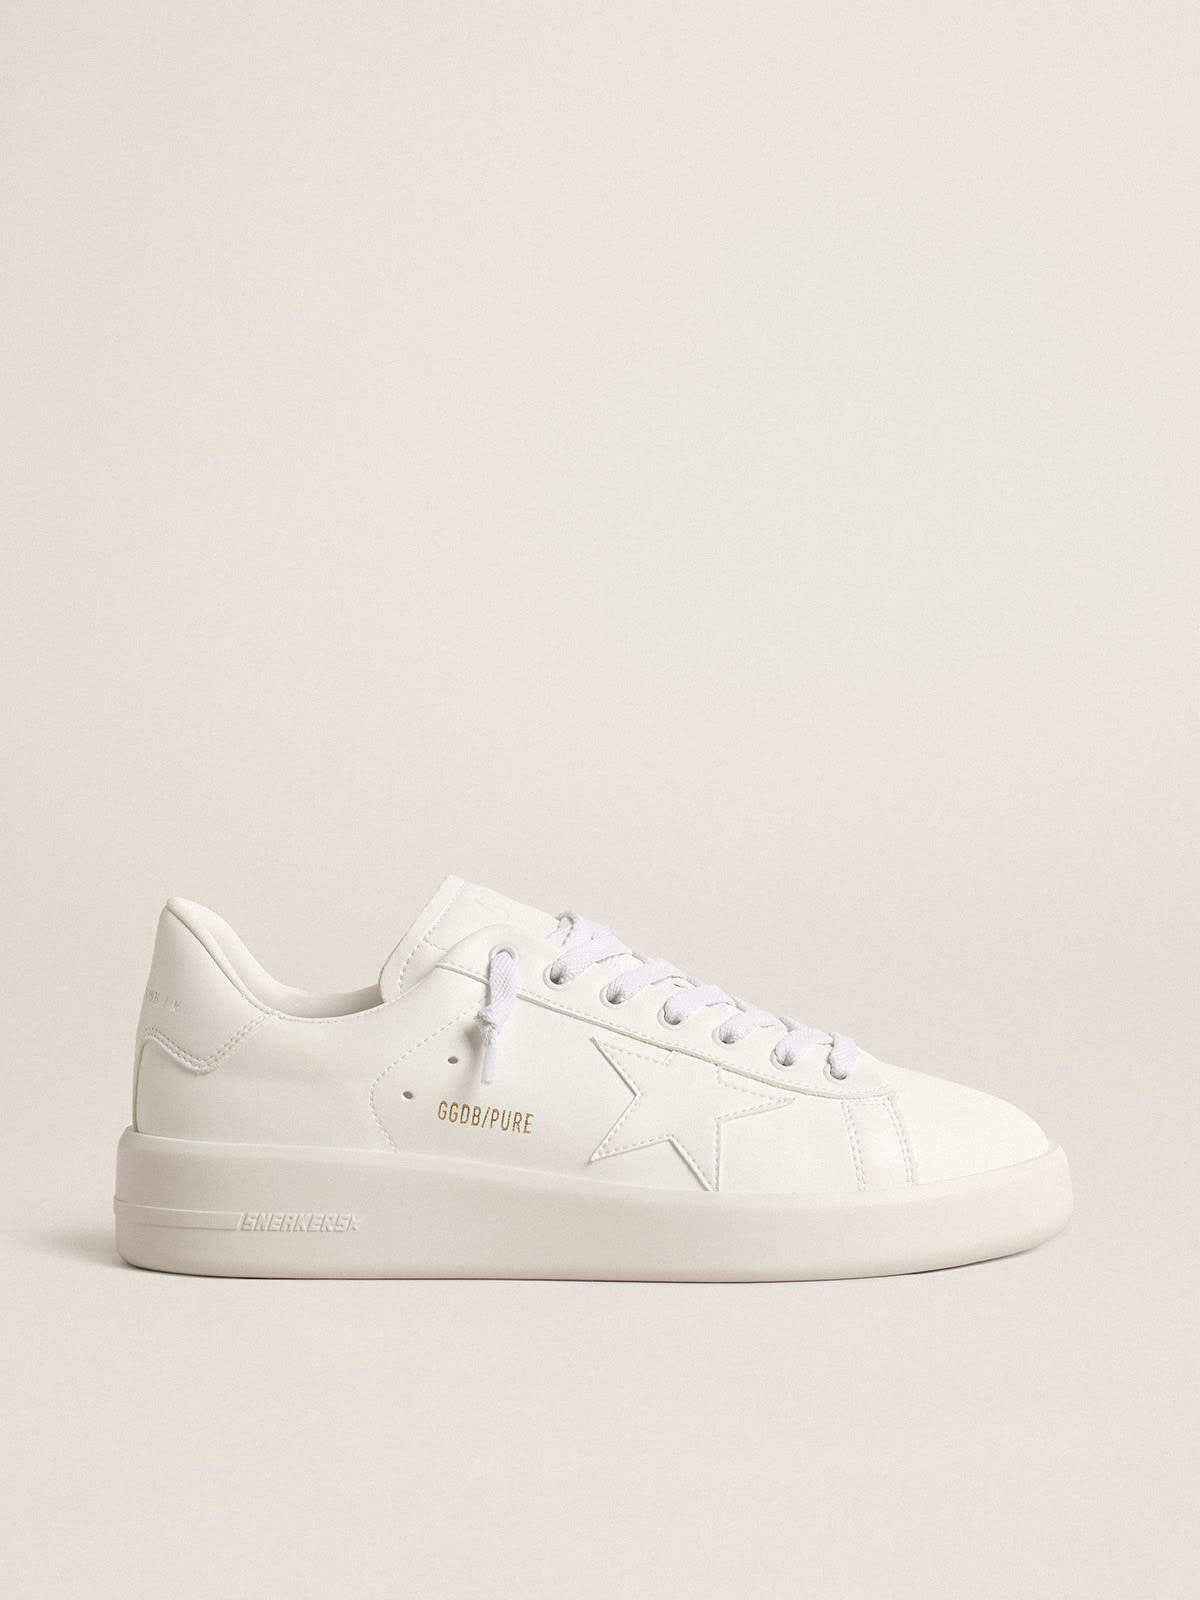 Golden Goose - Men’s bio-based Purestar with white star and heel tab in 